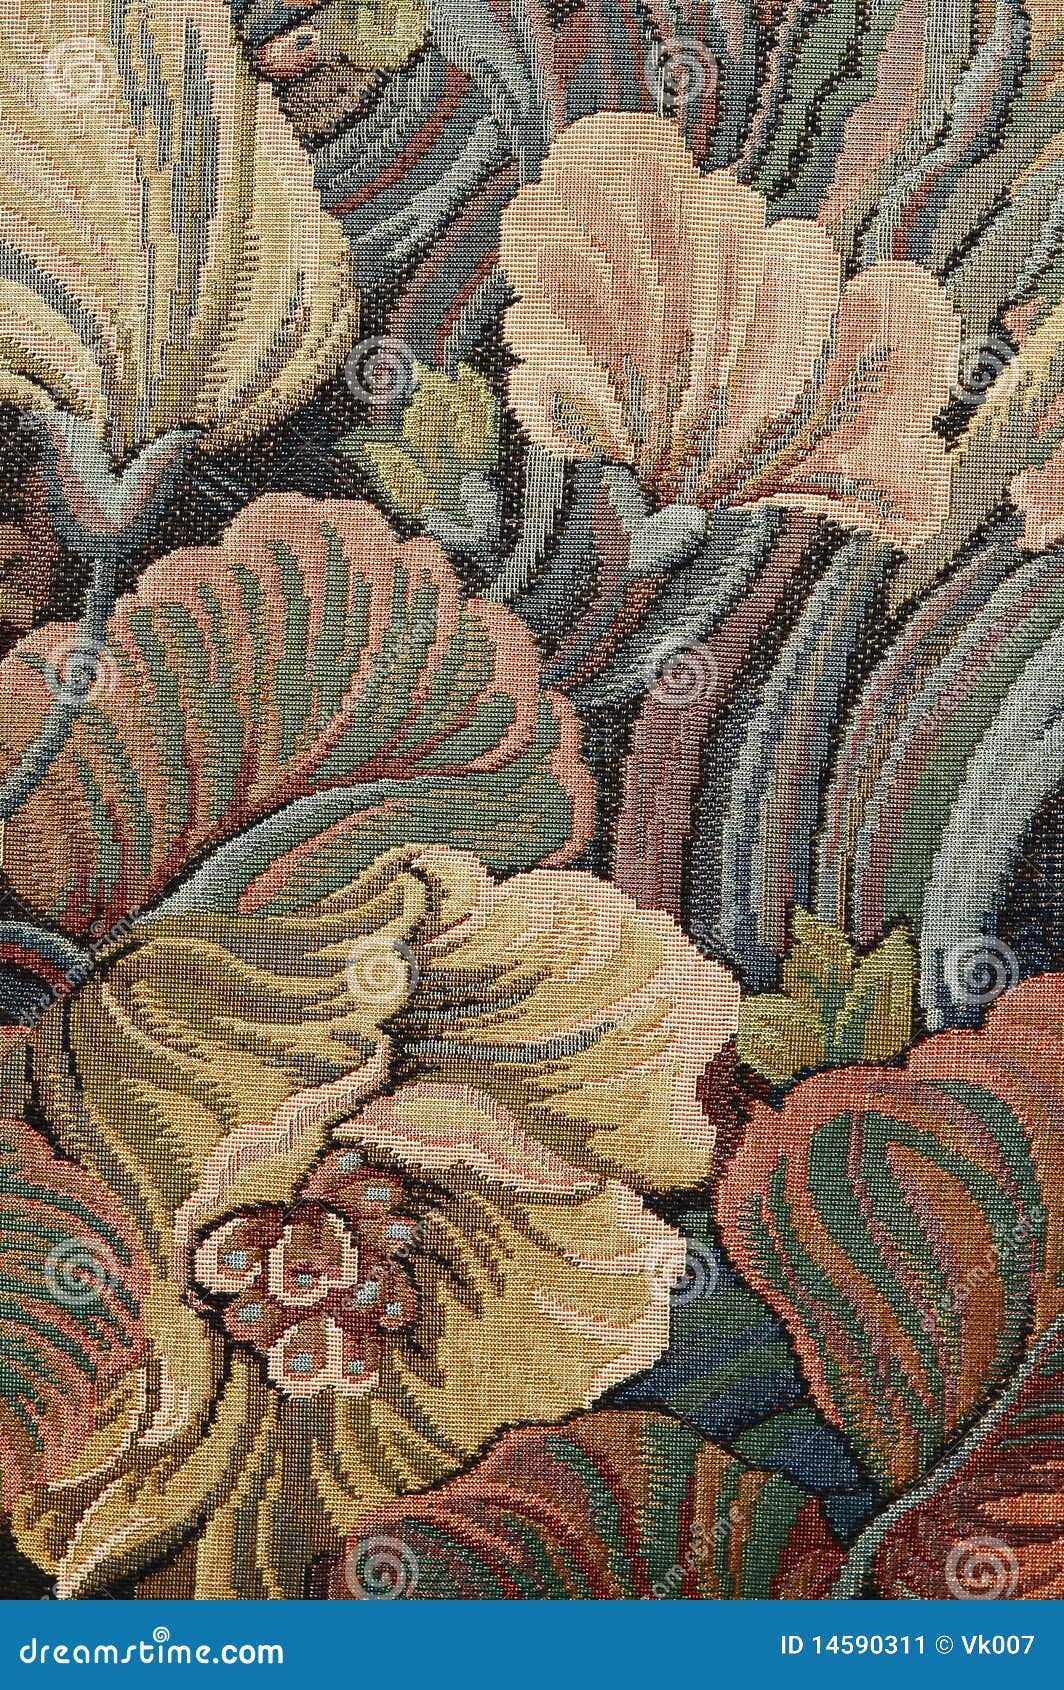 pattern of a classical ornate floral tapestry